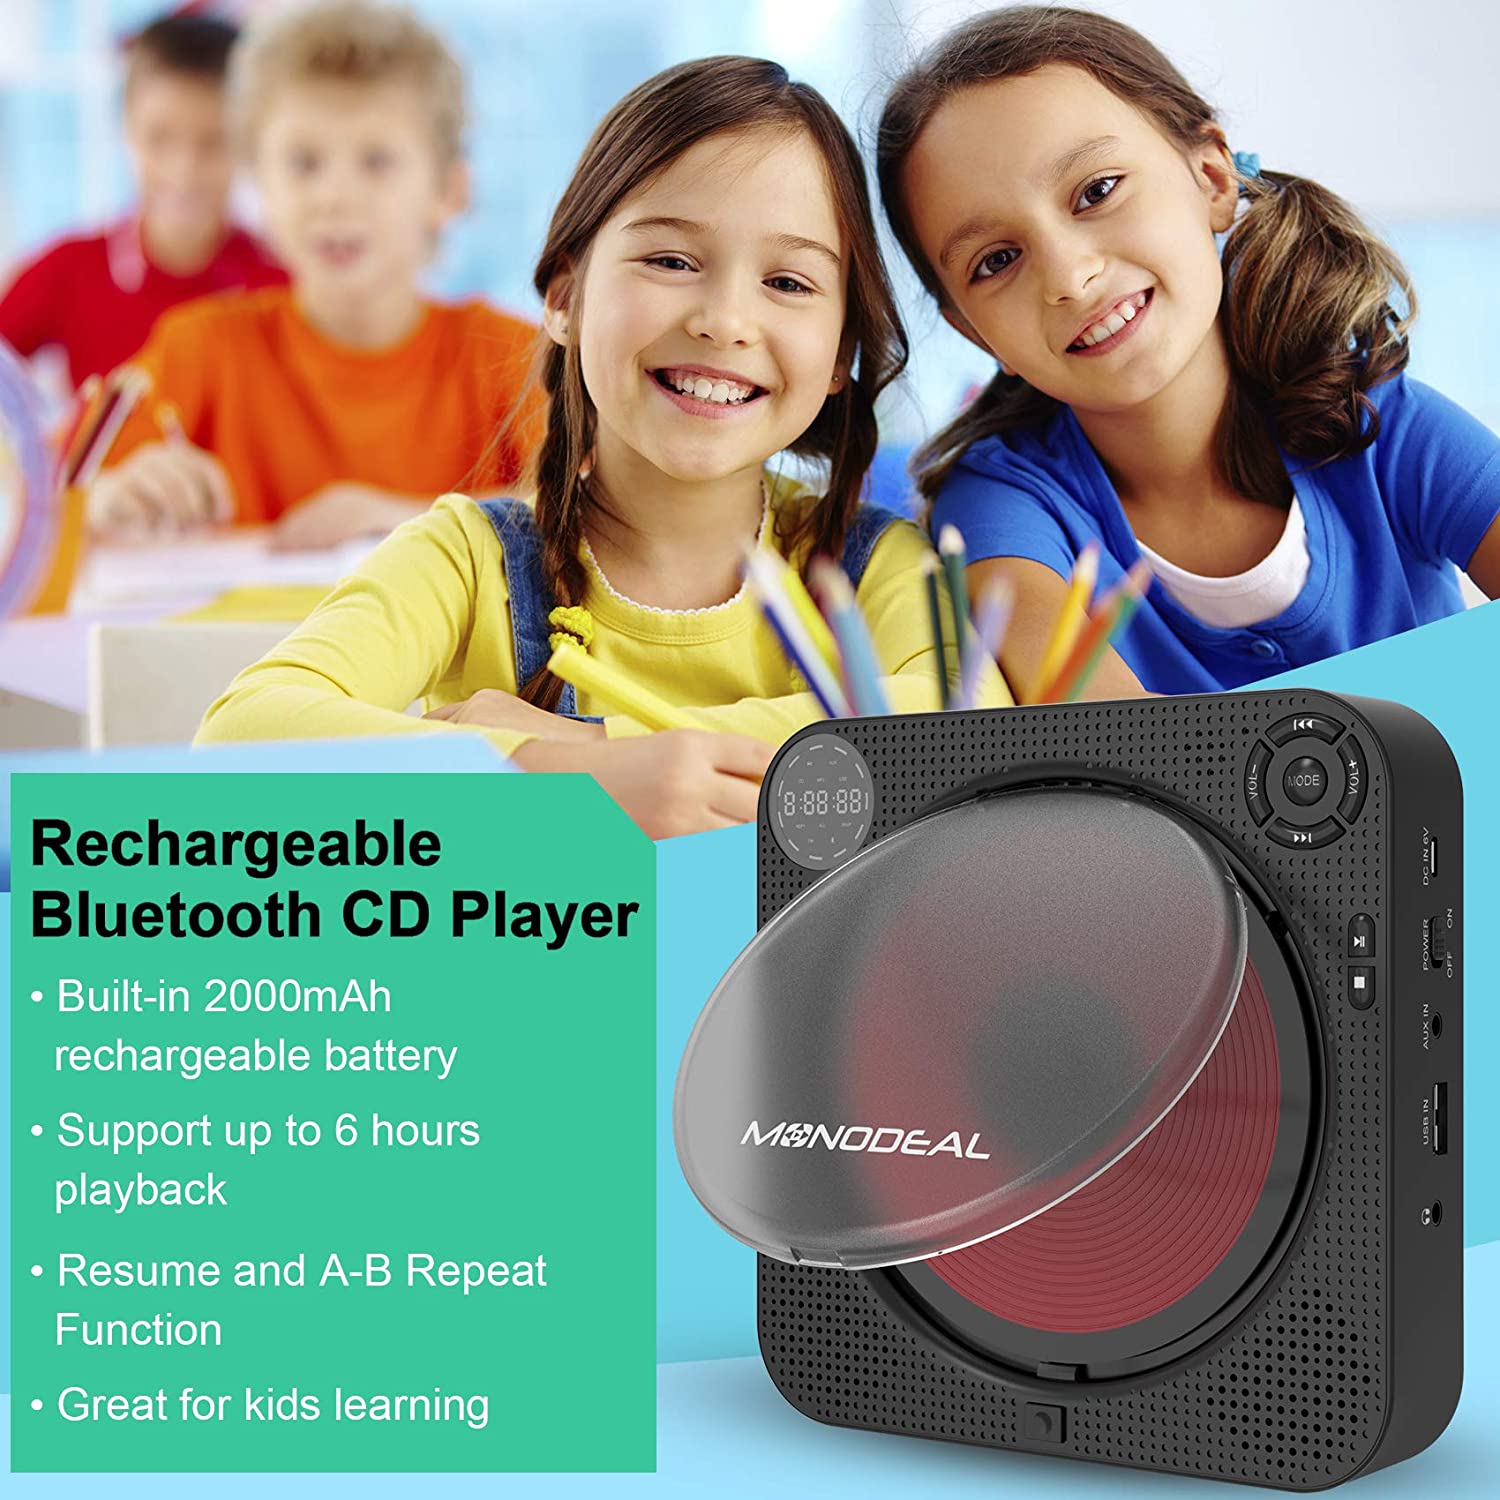 CD Player with Bluetooth, MONODEAL Portable Rechargeable CD Player with Built-in Speakers, Wall CD Player for Home, CD Player for Car and Outdoors (with Remote Control and Built-in FM Radio) - image 3 of 6